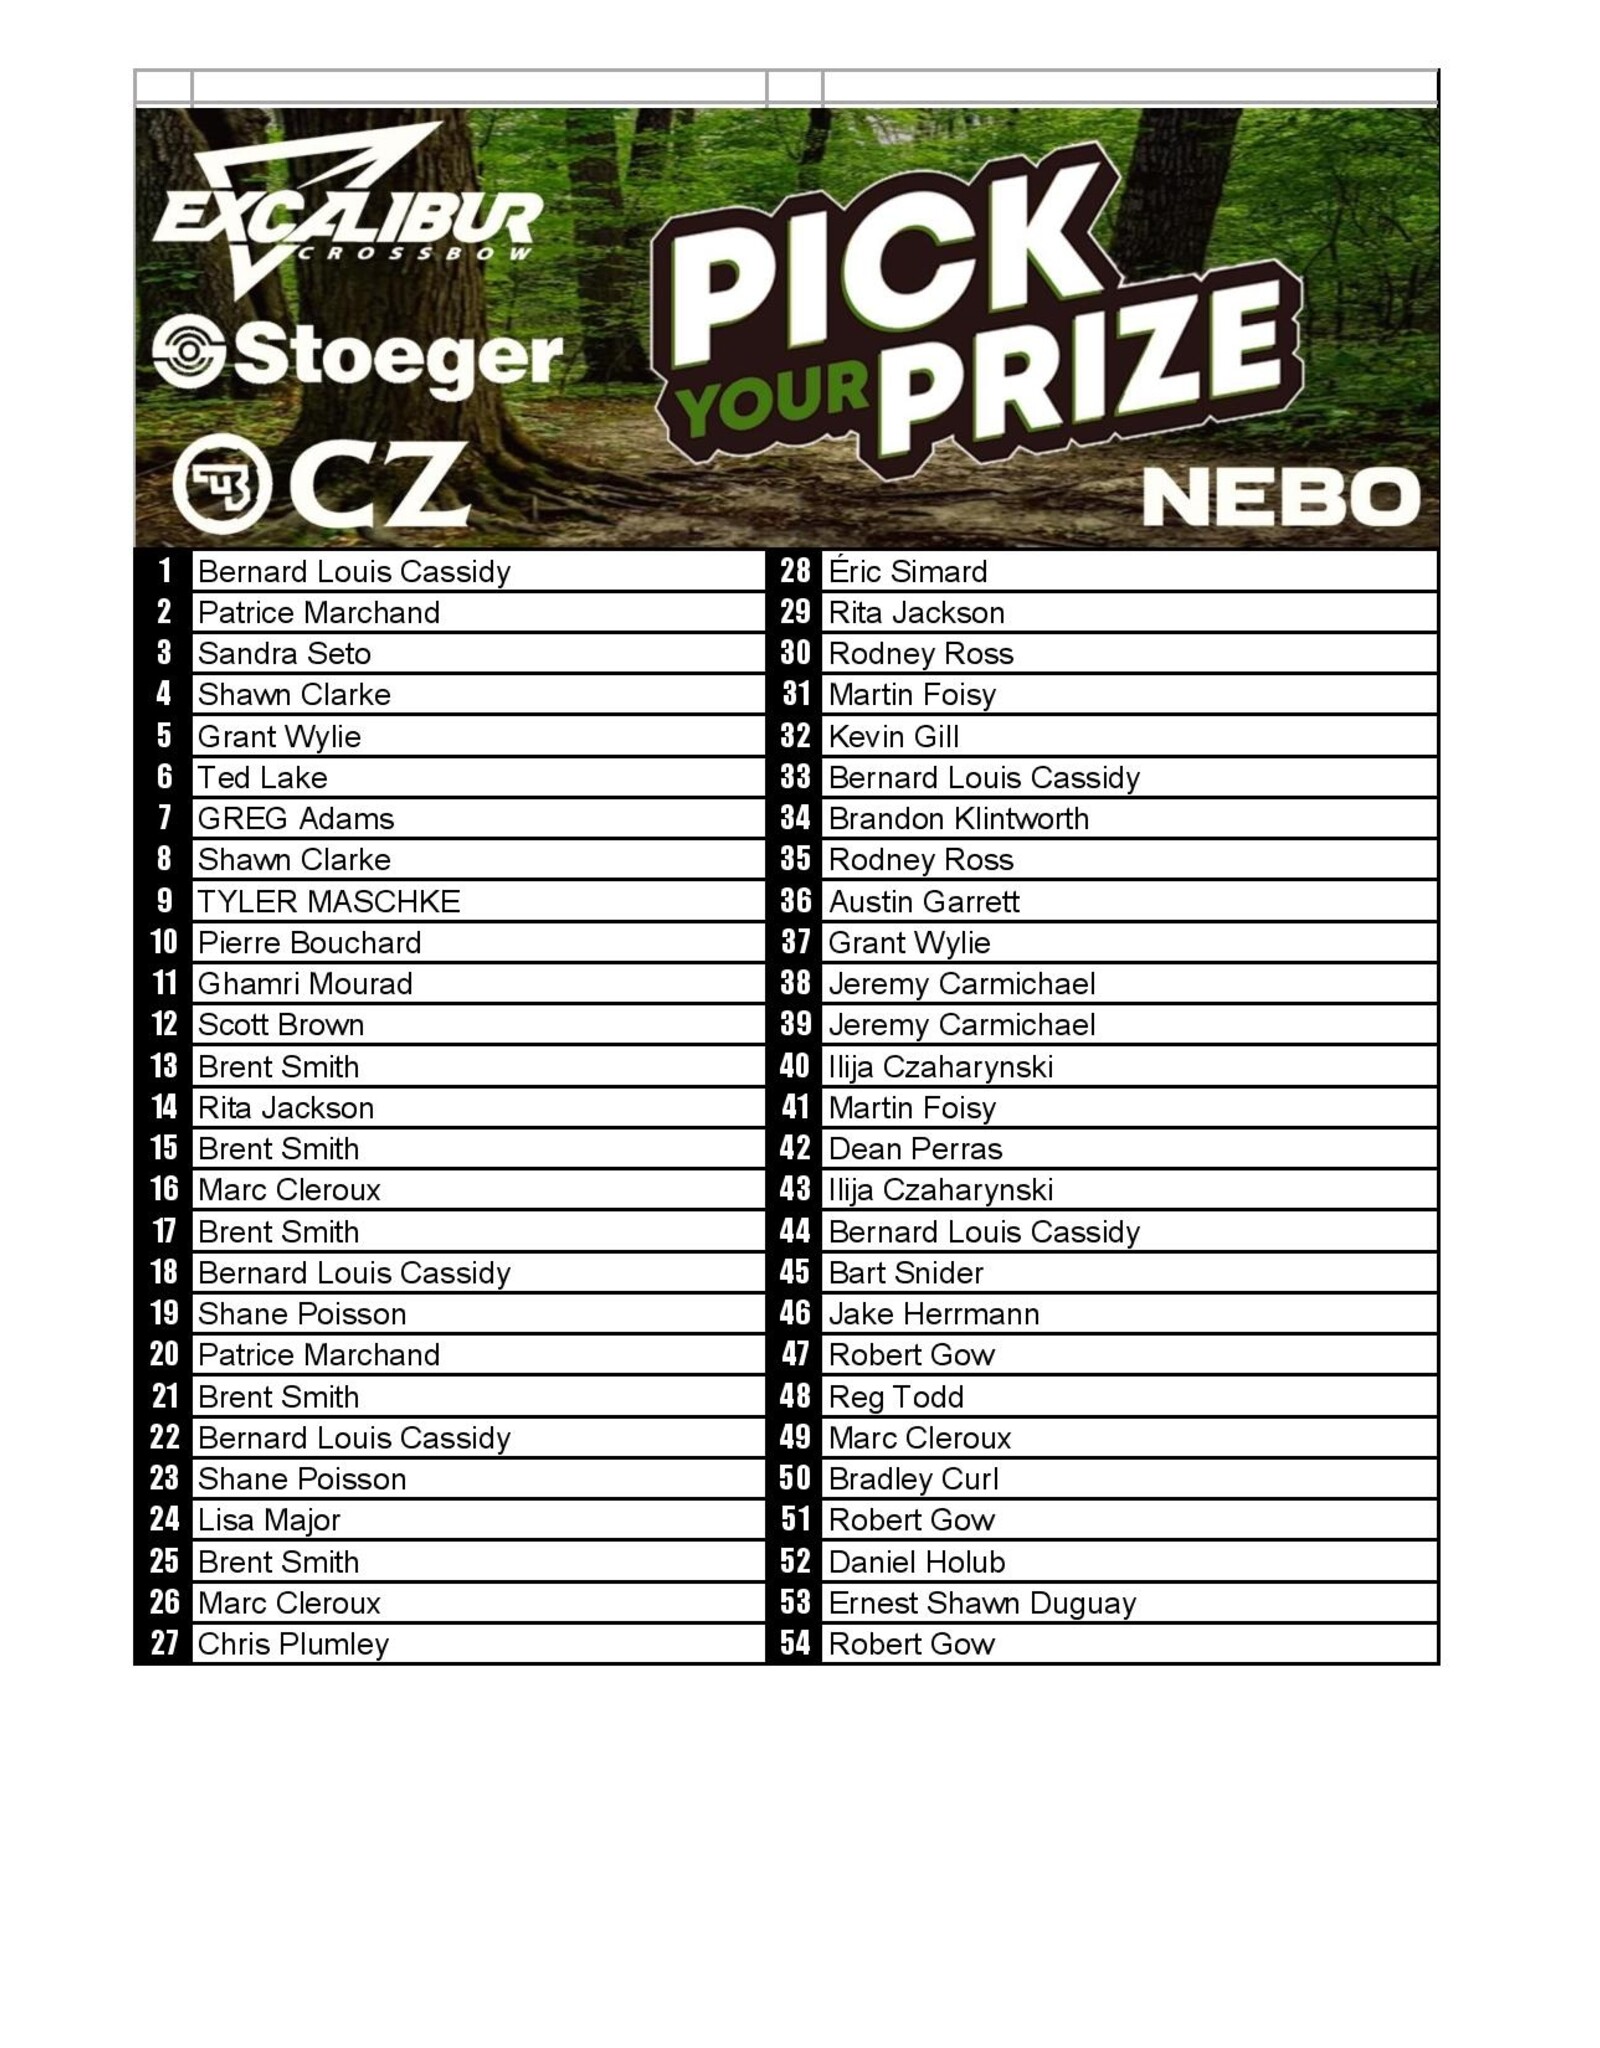 Draw #1214 - Pick Your Prize! Excalibur, Stoeger OR CZ457 w/ Nebo Work Light!